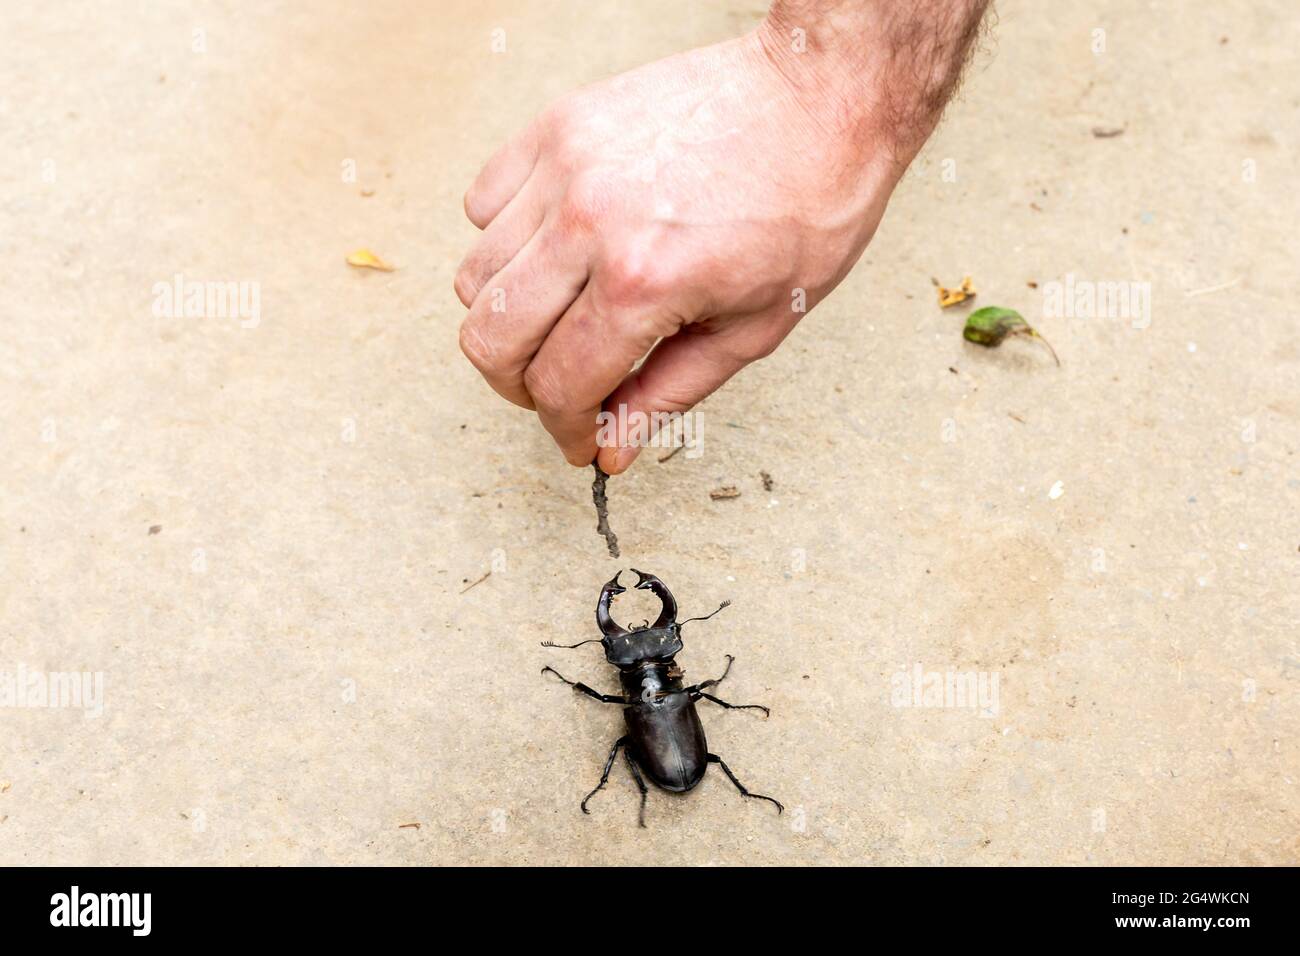 One, single European stag beetle on the ground with male hand playing with it Stock Photo